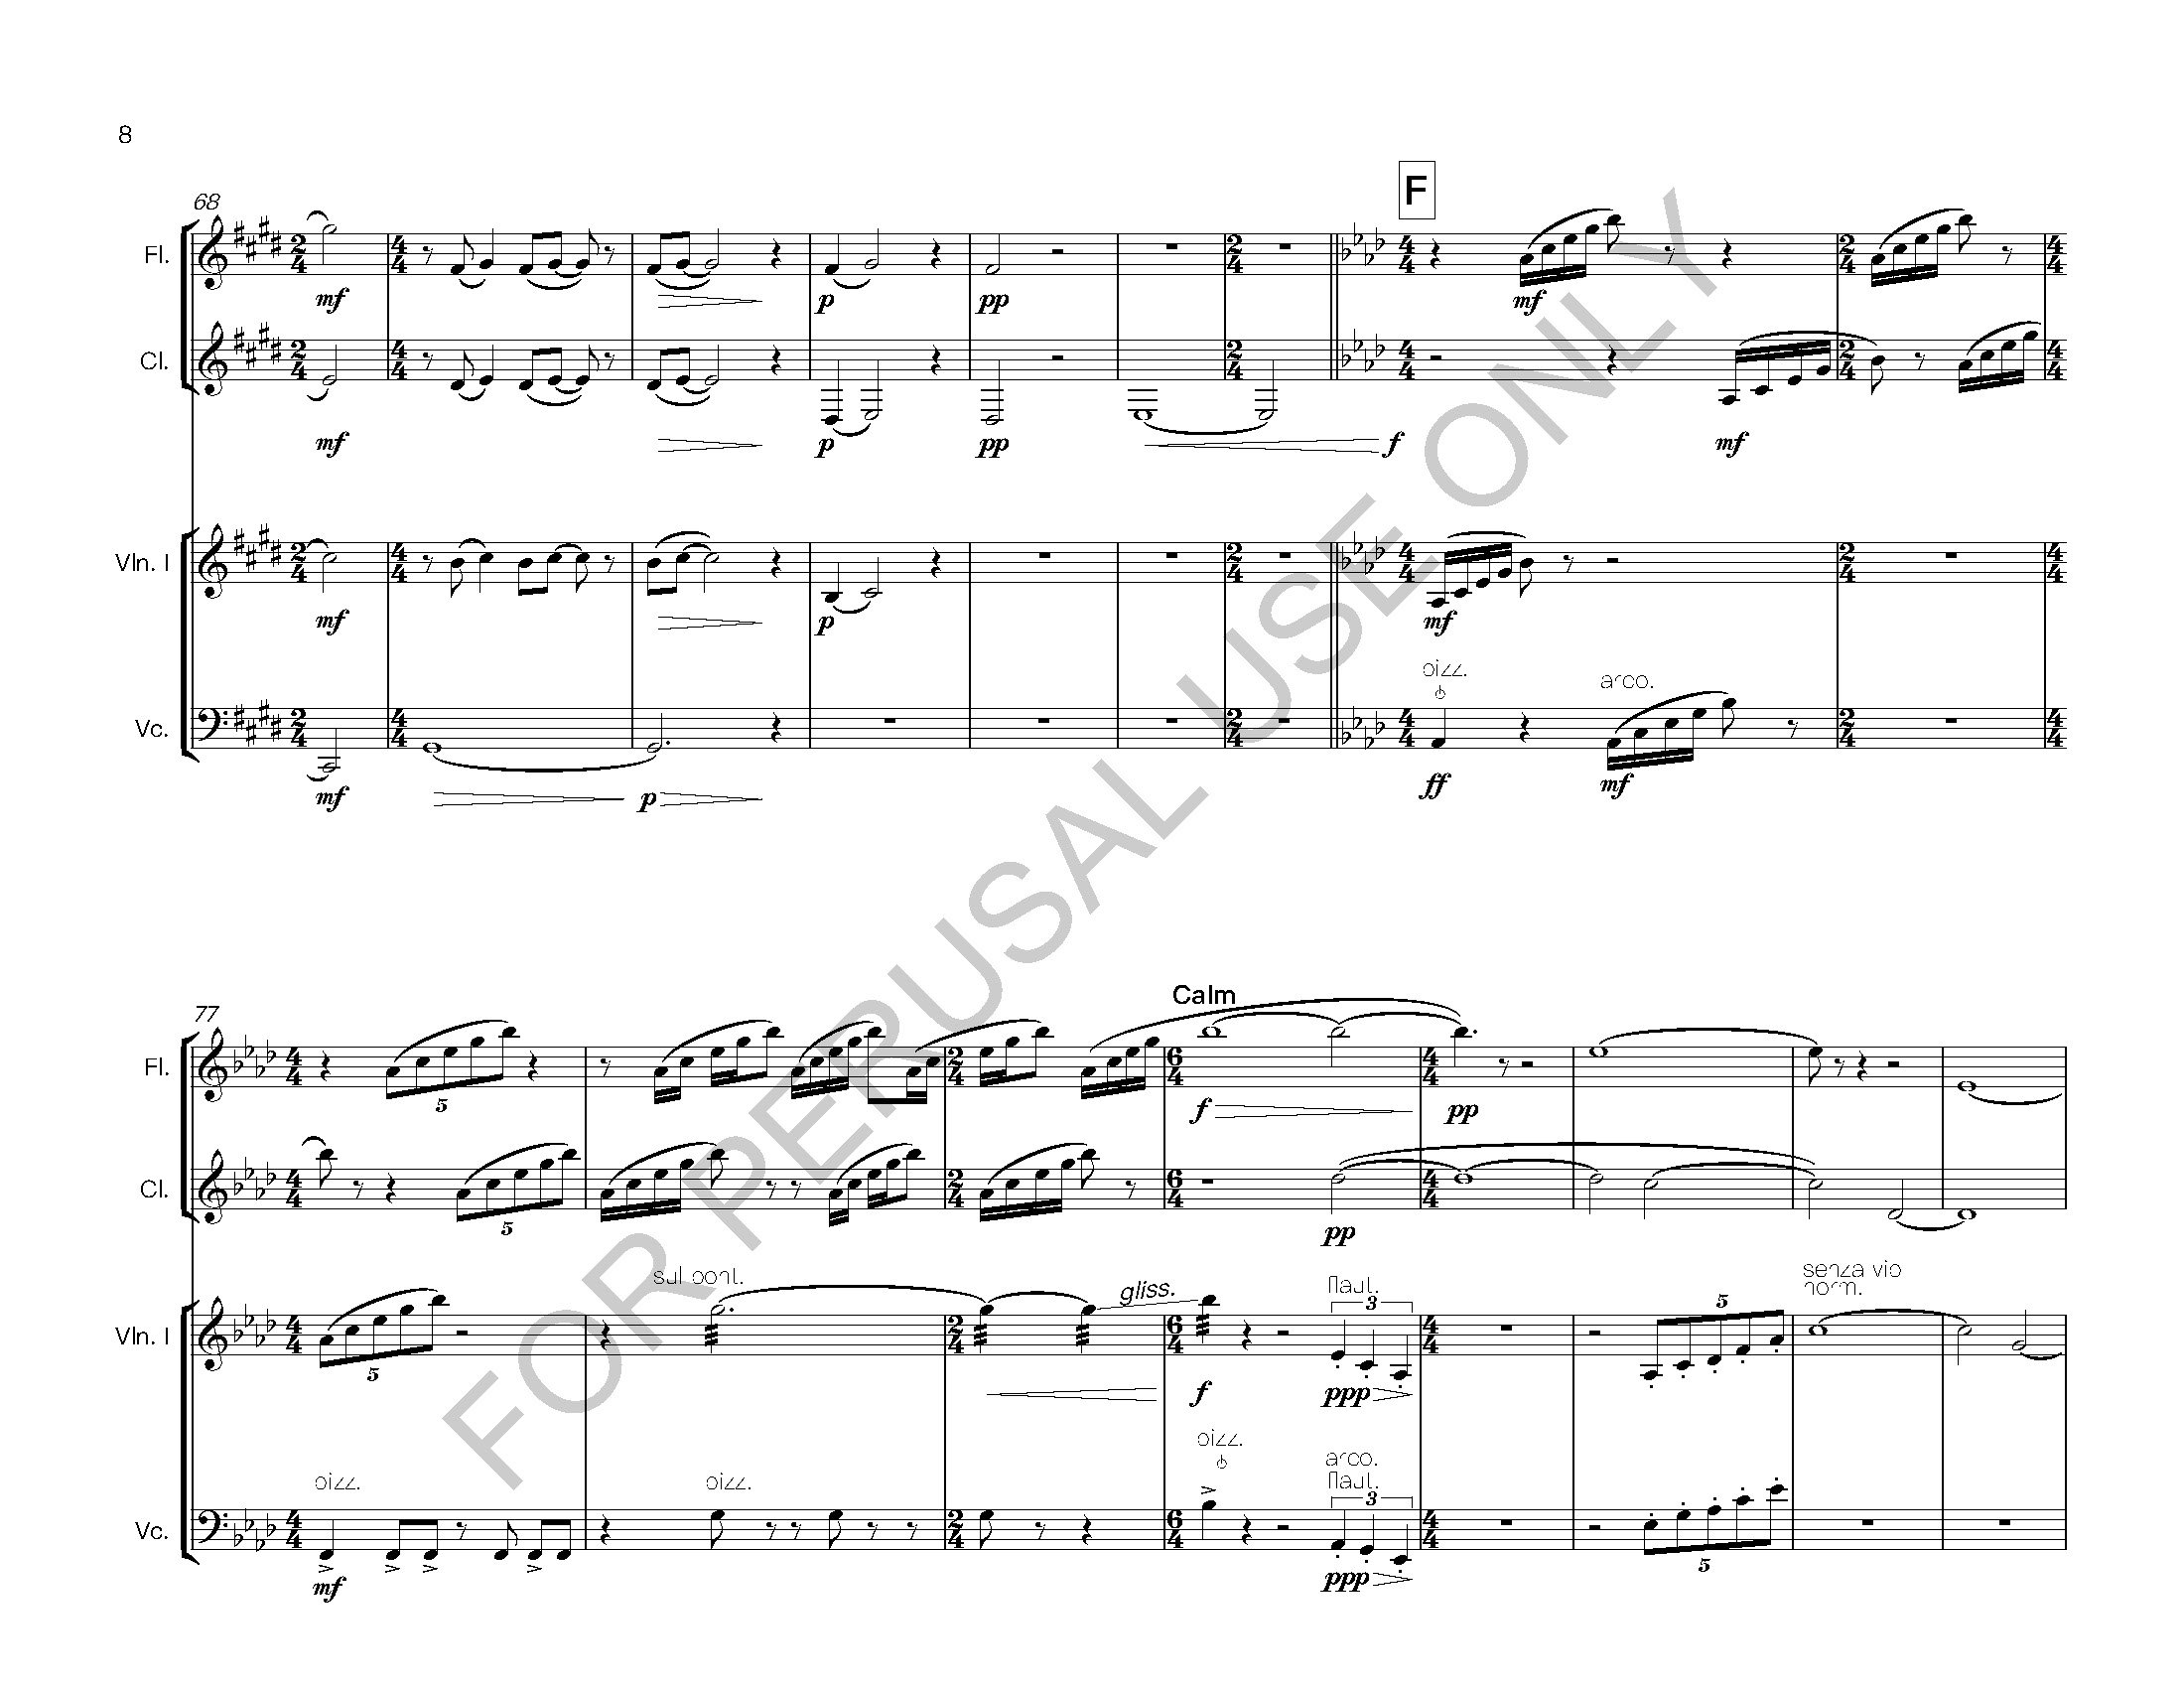 Thread the Needle - Full Score in C_Page_08.jpg